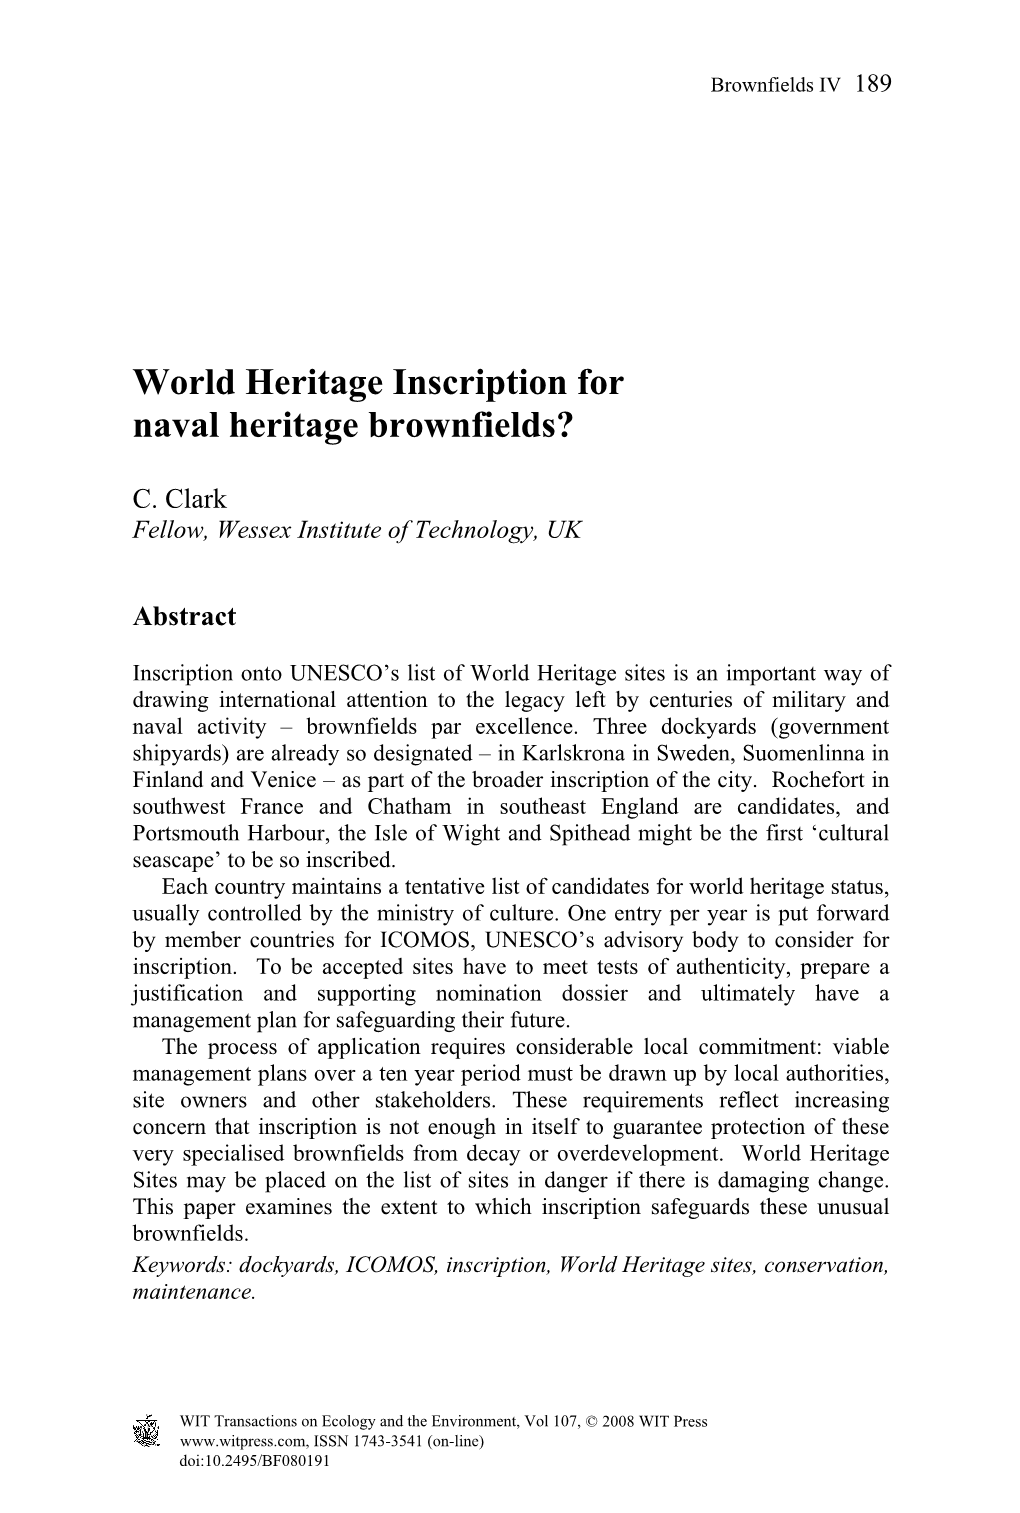 World Heritage Inscription for Naval Heritage Brownfields?